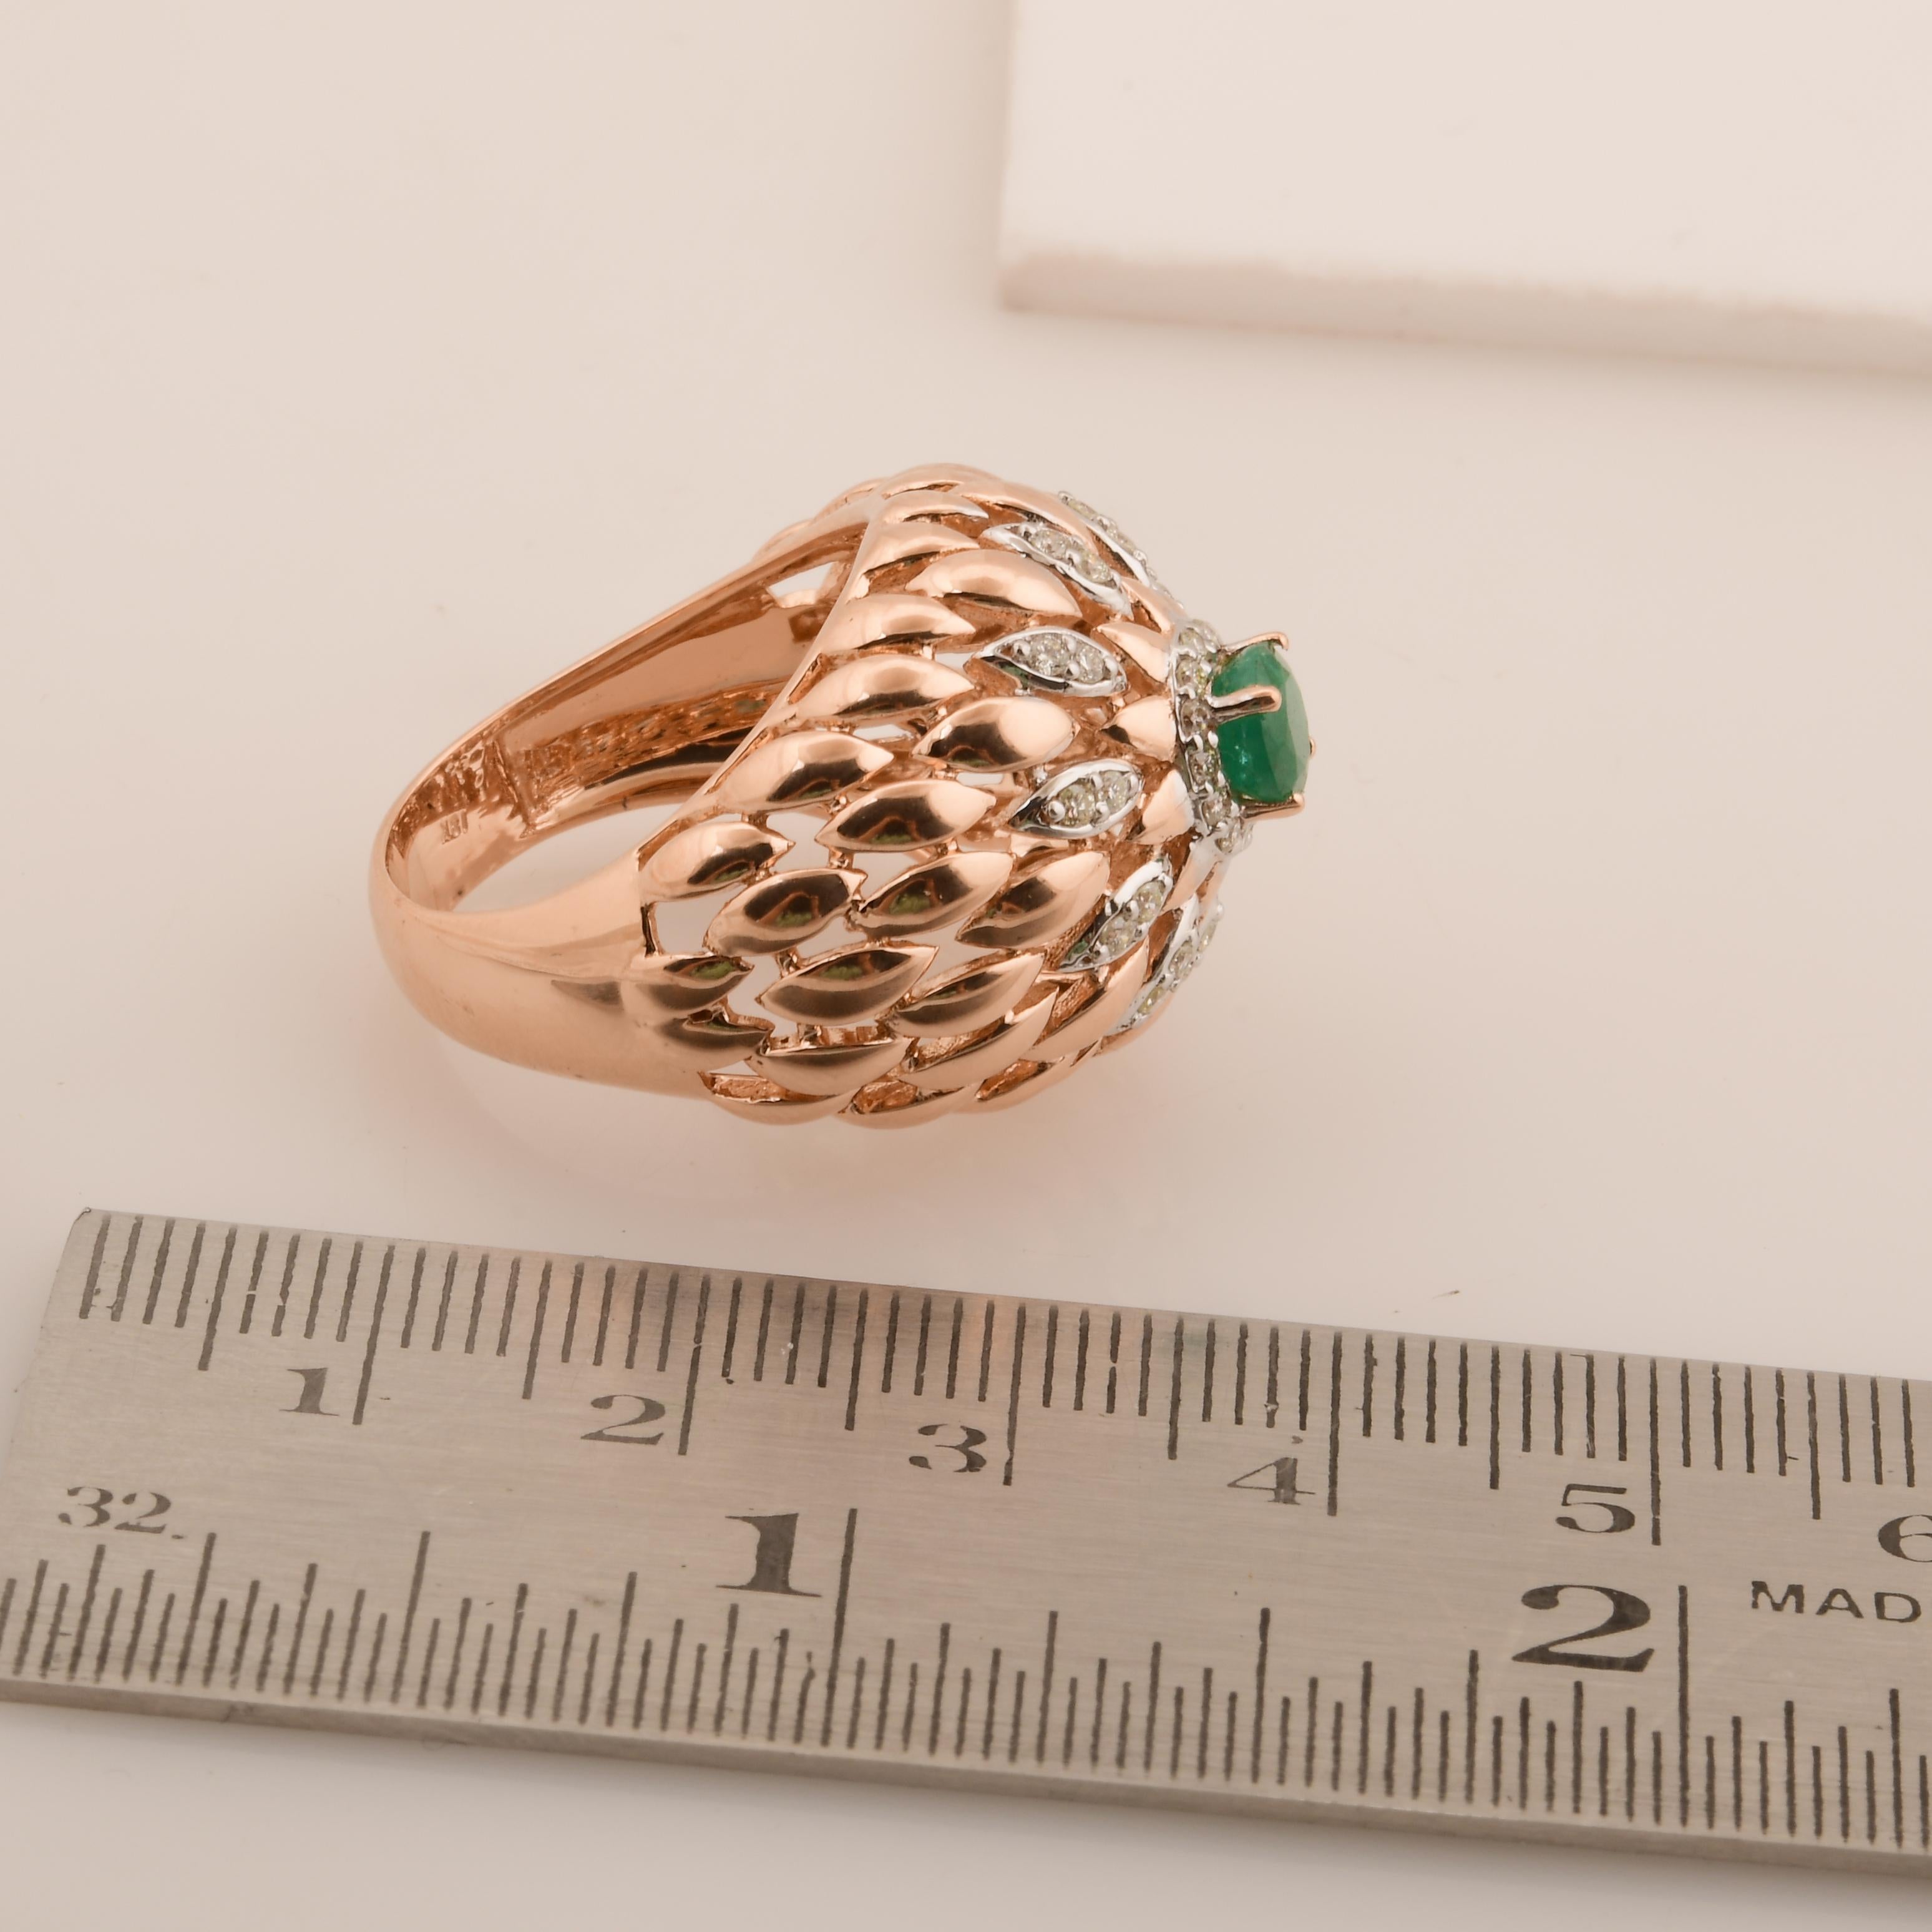 For Sale:  Natural Emerald Gemstone Dome Ring Diamond Pave Solid 18k Rose Gold Fine Jewelry 6